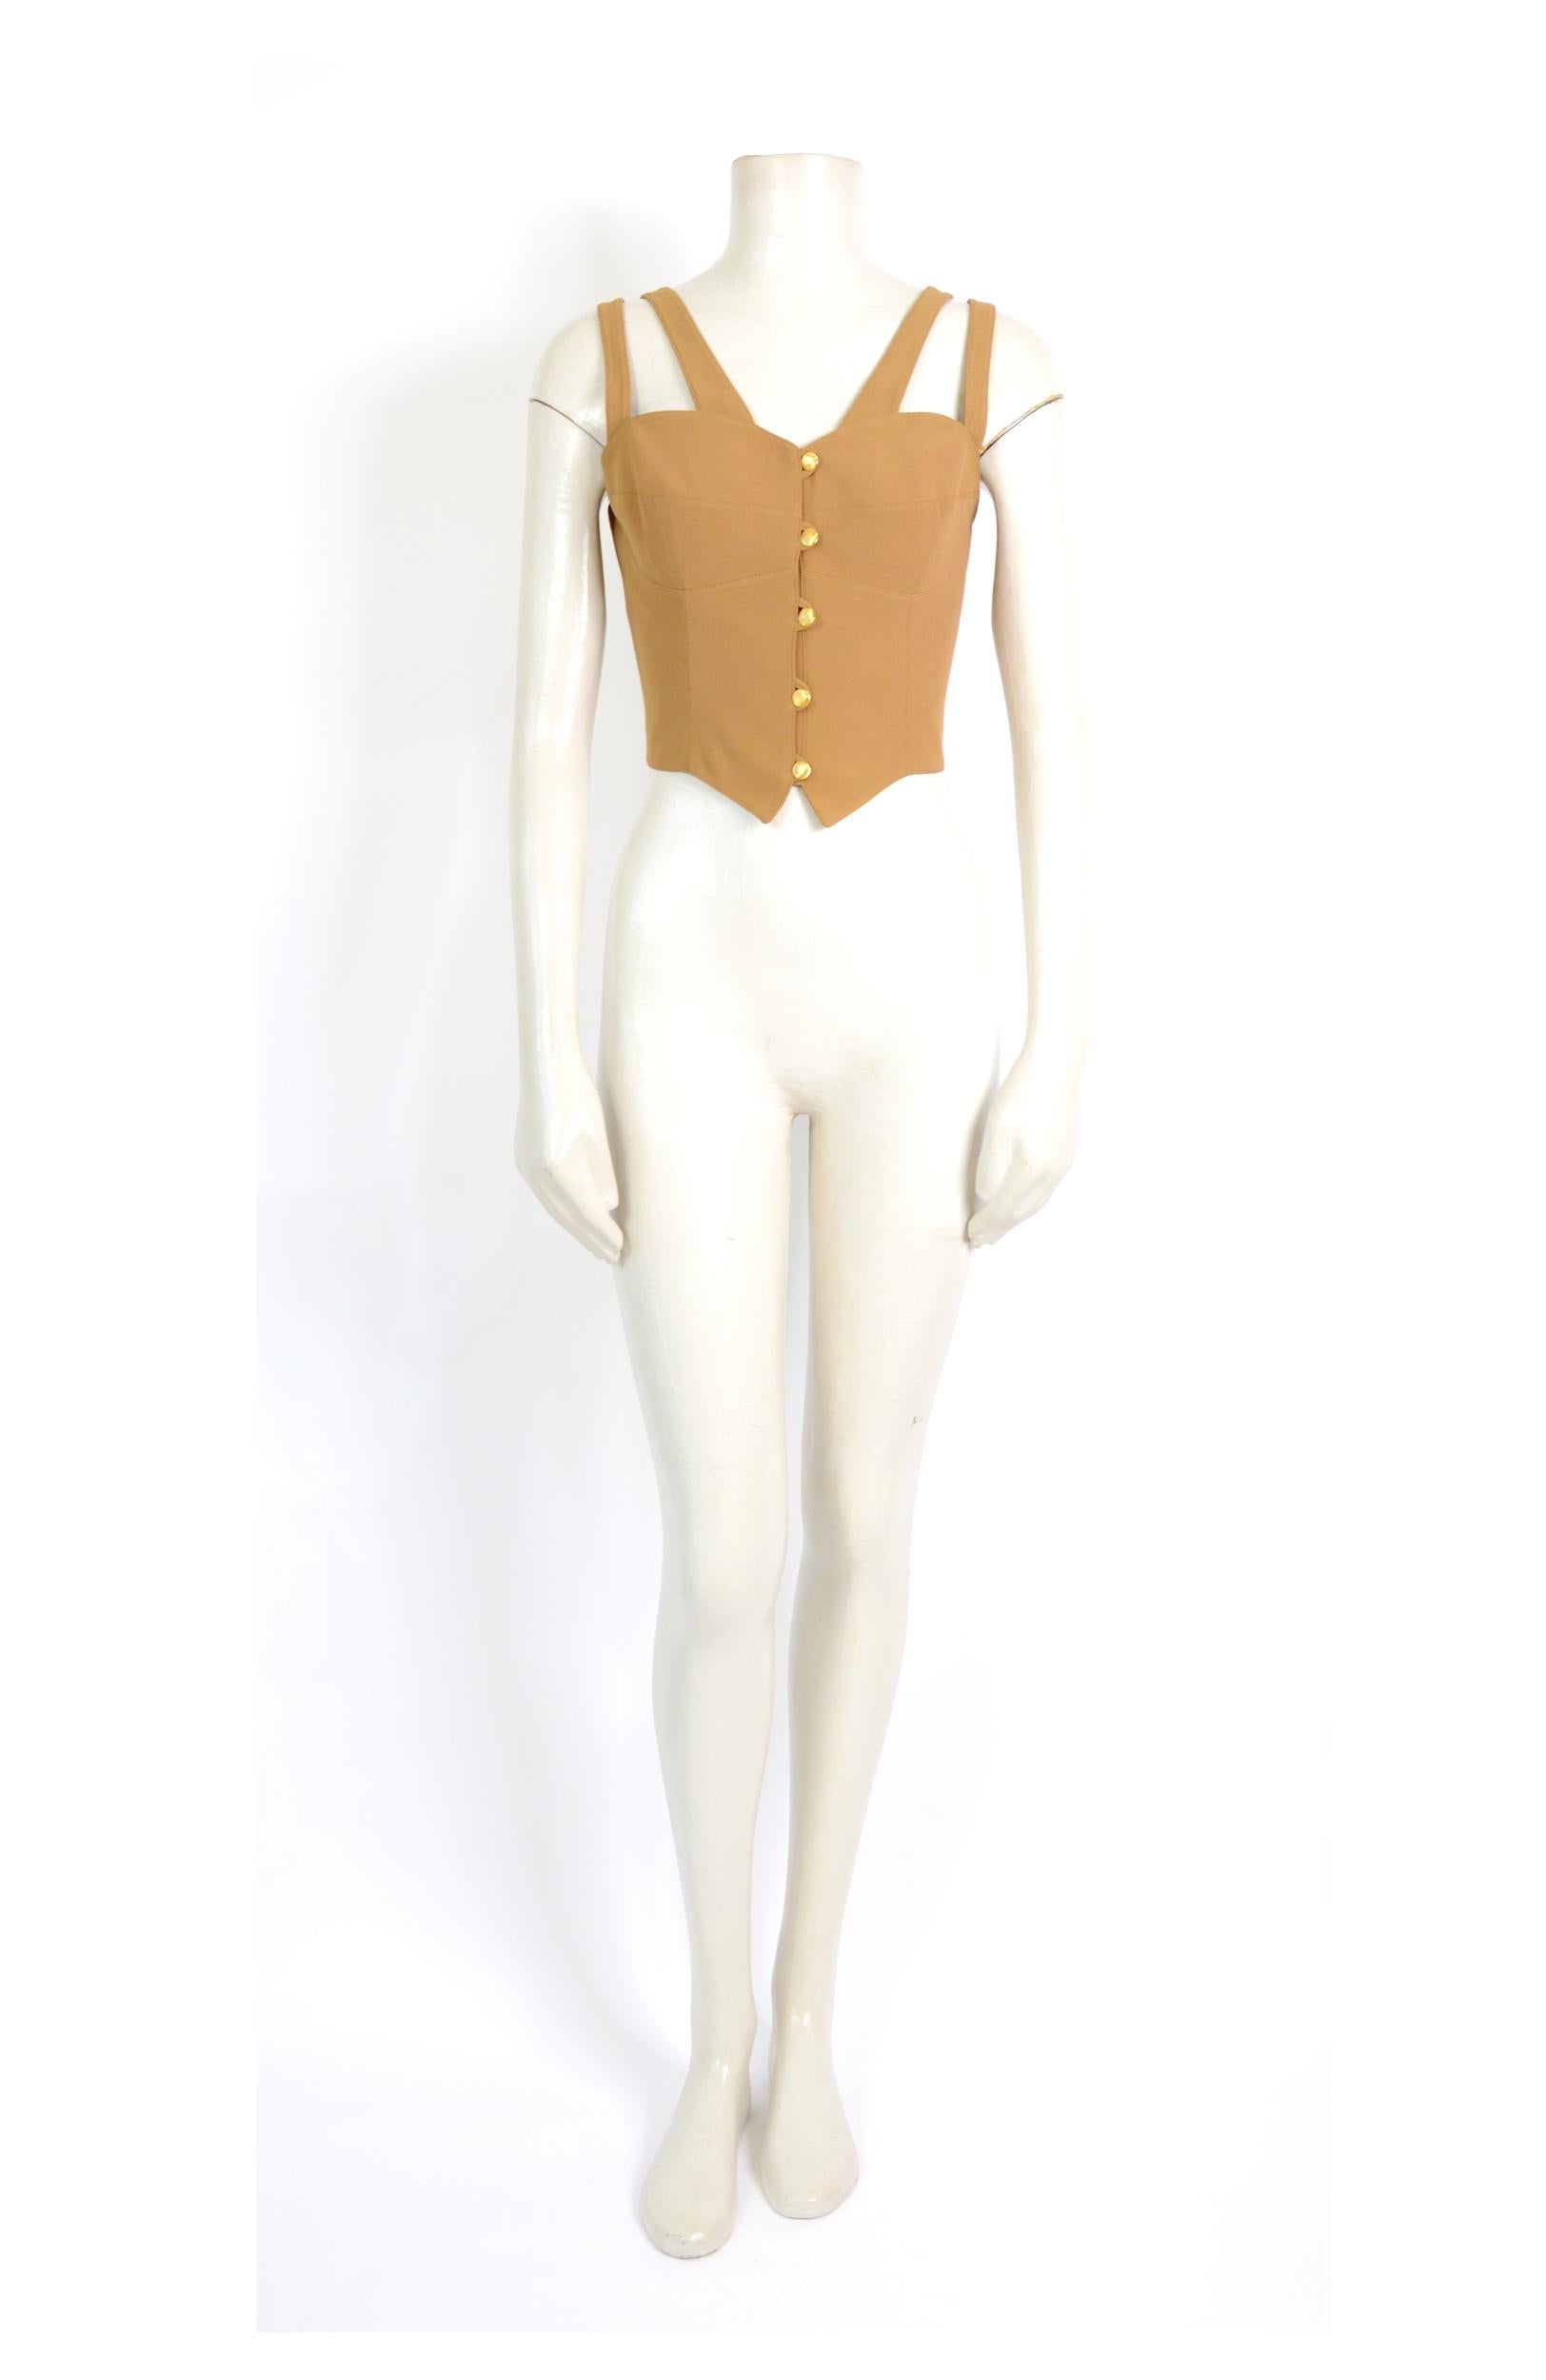 A fabulous vintage 1980s bustier top by Claude Montana
Made in Italy - Size 44 / 10 - The material is a mix of viscose and wool - the top closes with five small gold buttons at the front - in excellent condition. 
Measurements taken flat: 
Ua to Ua